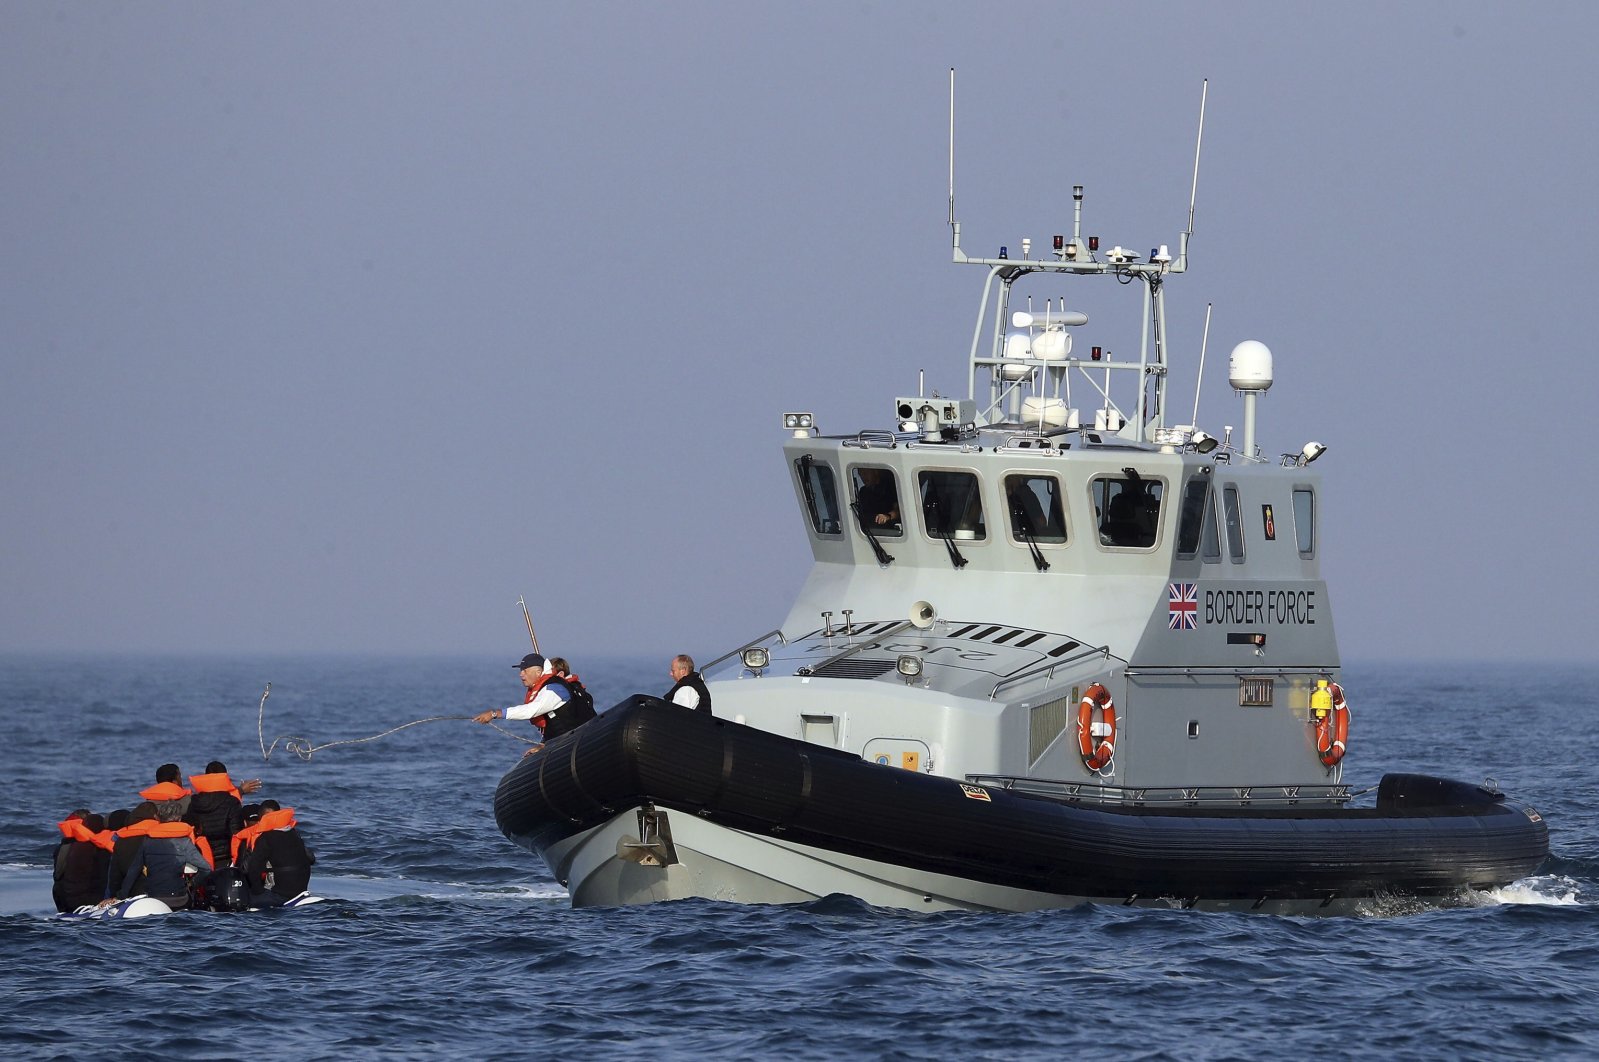 A Border Force vessel assists a group of people thought to be migrants traveling on an inflatable dinghy in the English Channel, Britain, Aug. 10, 2020. (AP Photo)